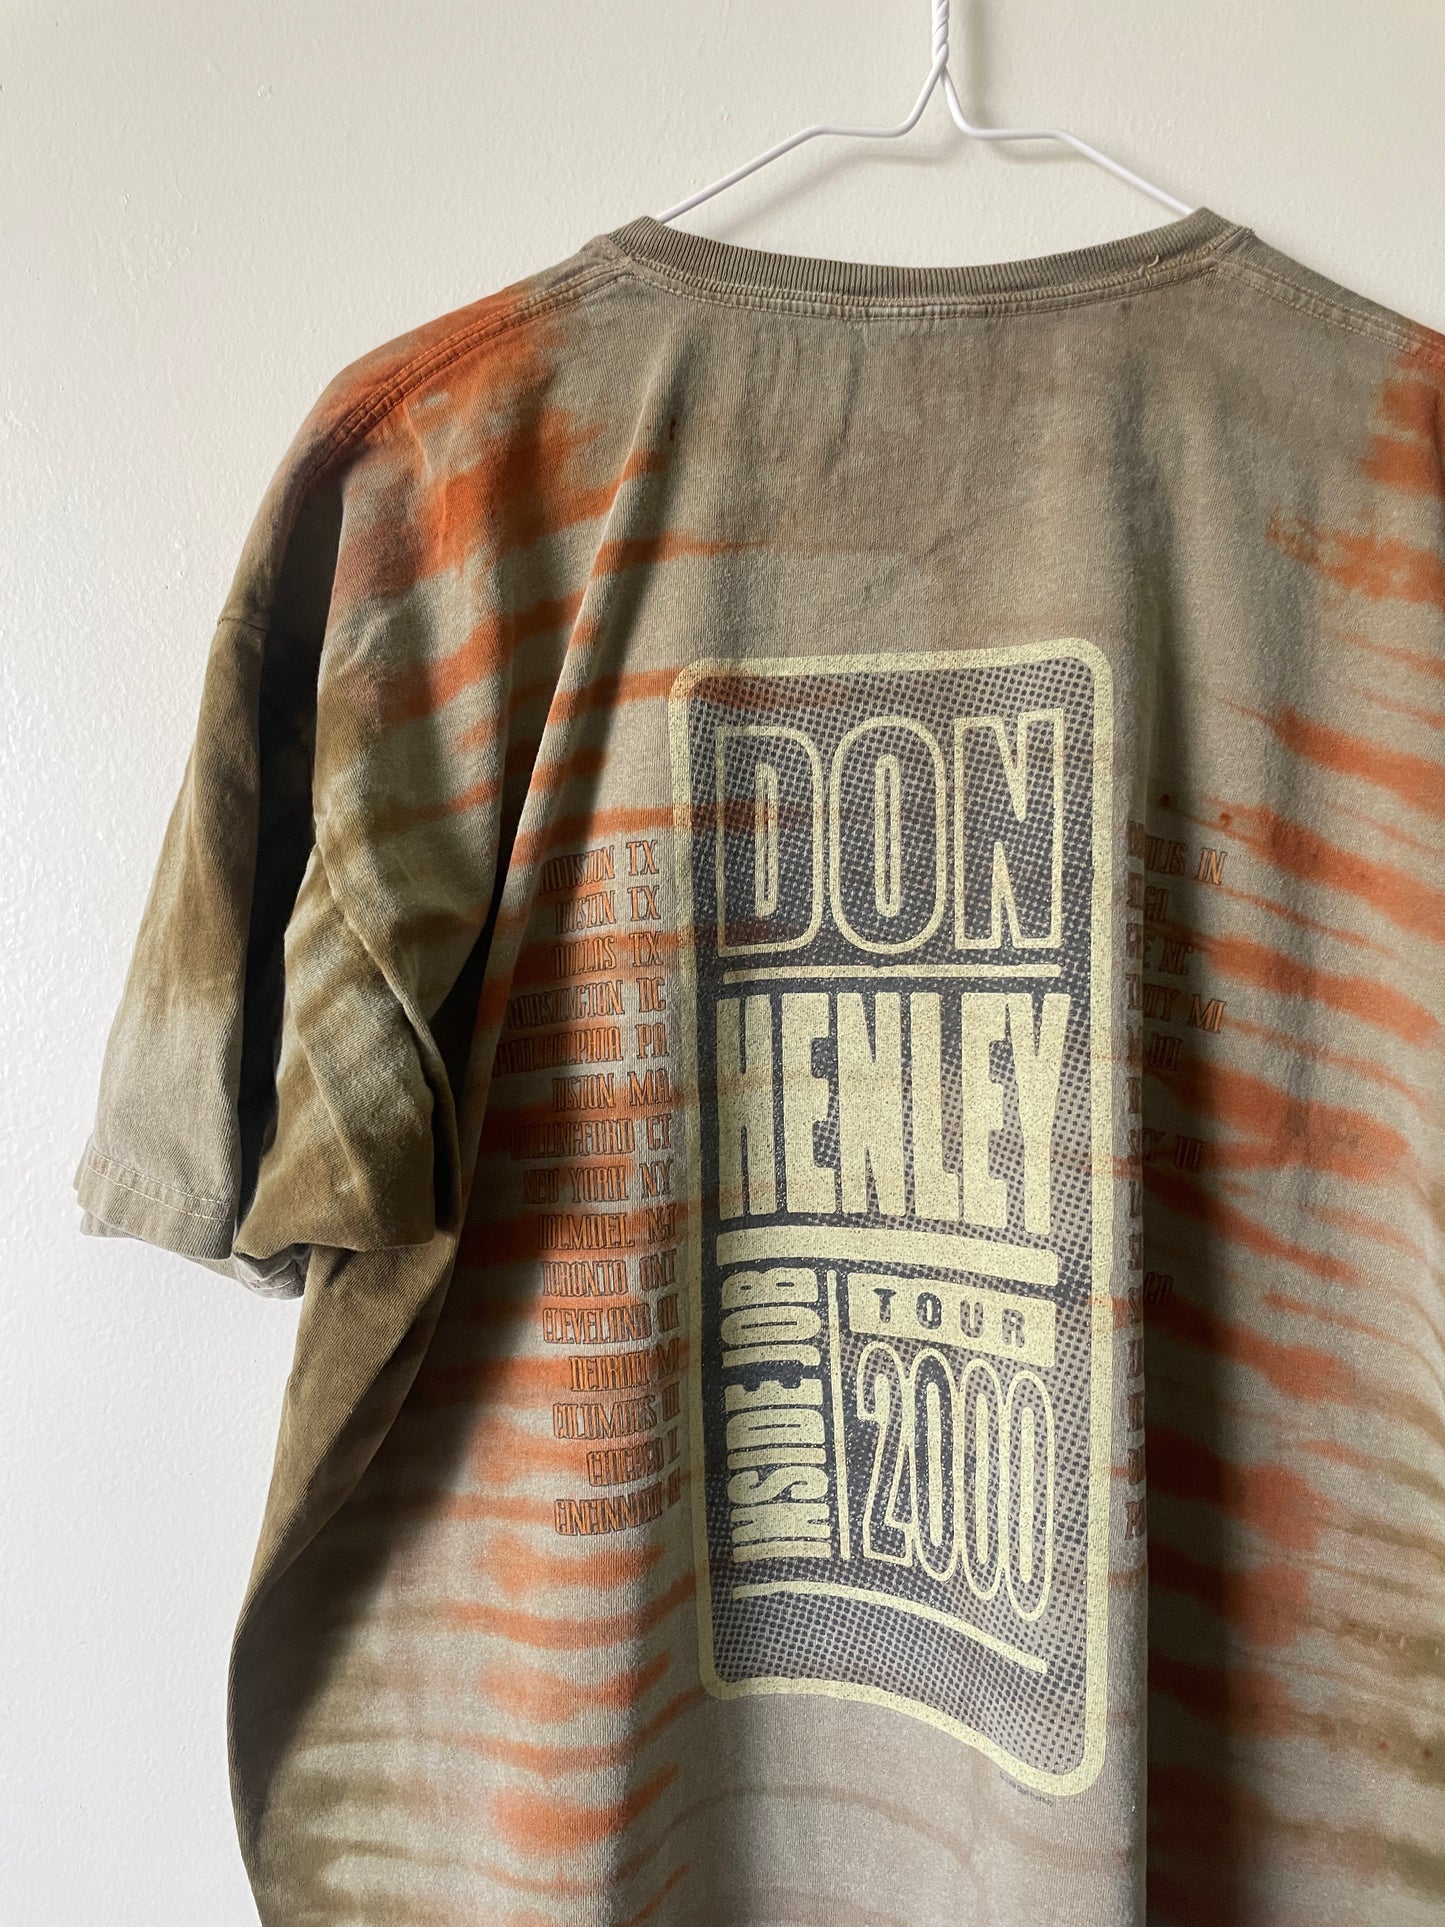 Don Henley Inside Job 2000 Tour Handmade Tie Dye Short Sleeve T-Shirt | One-Of-a-Kind Upcycled Tan and Brown Pleated Top | Men's XL